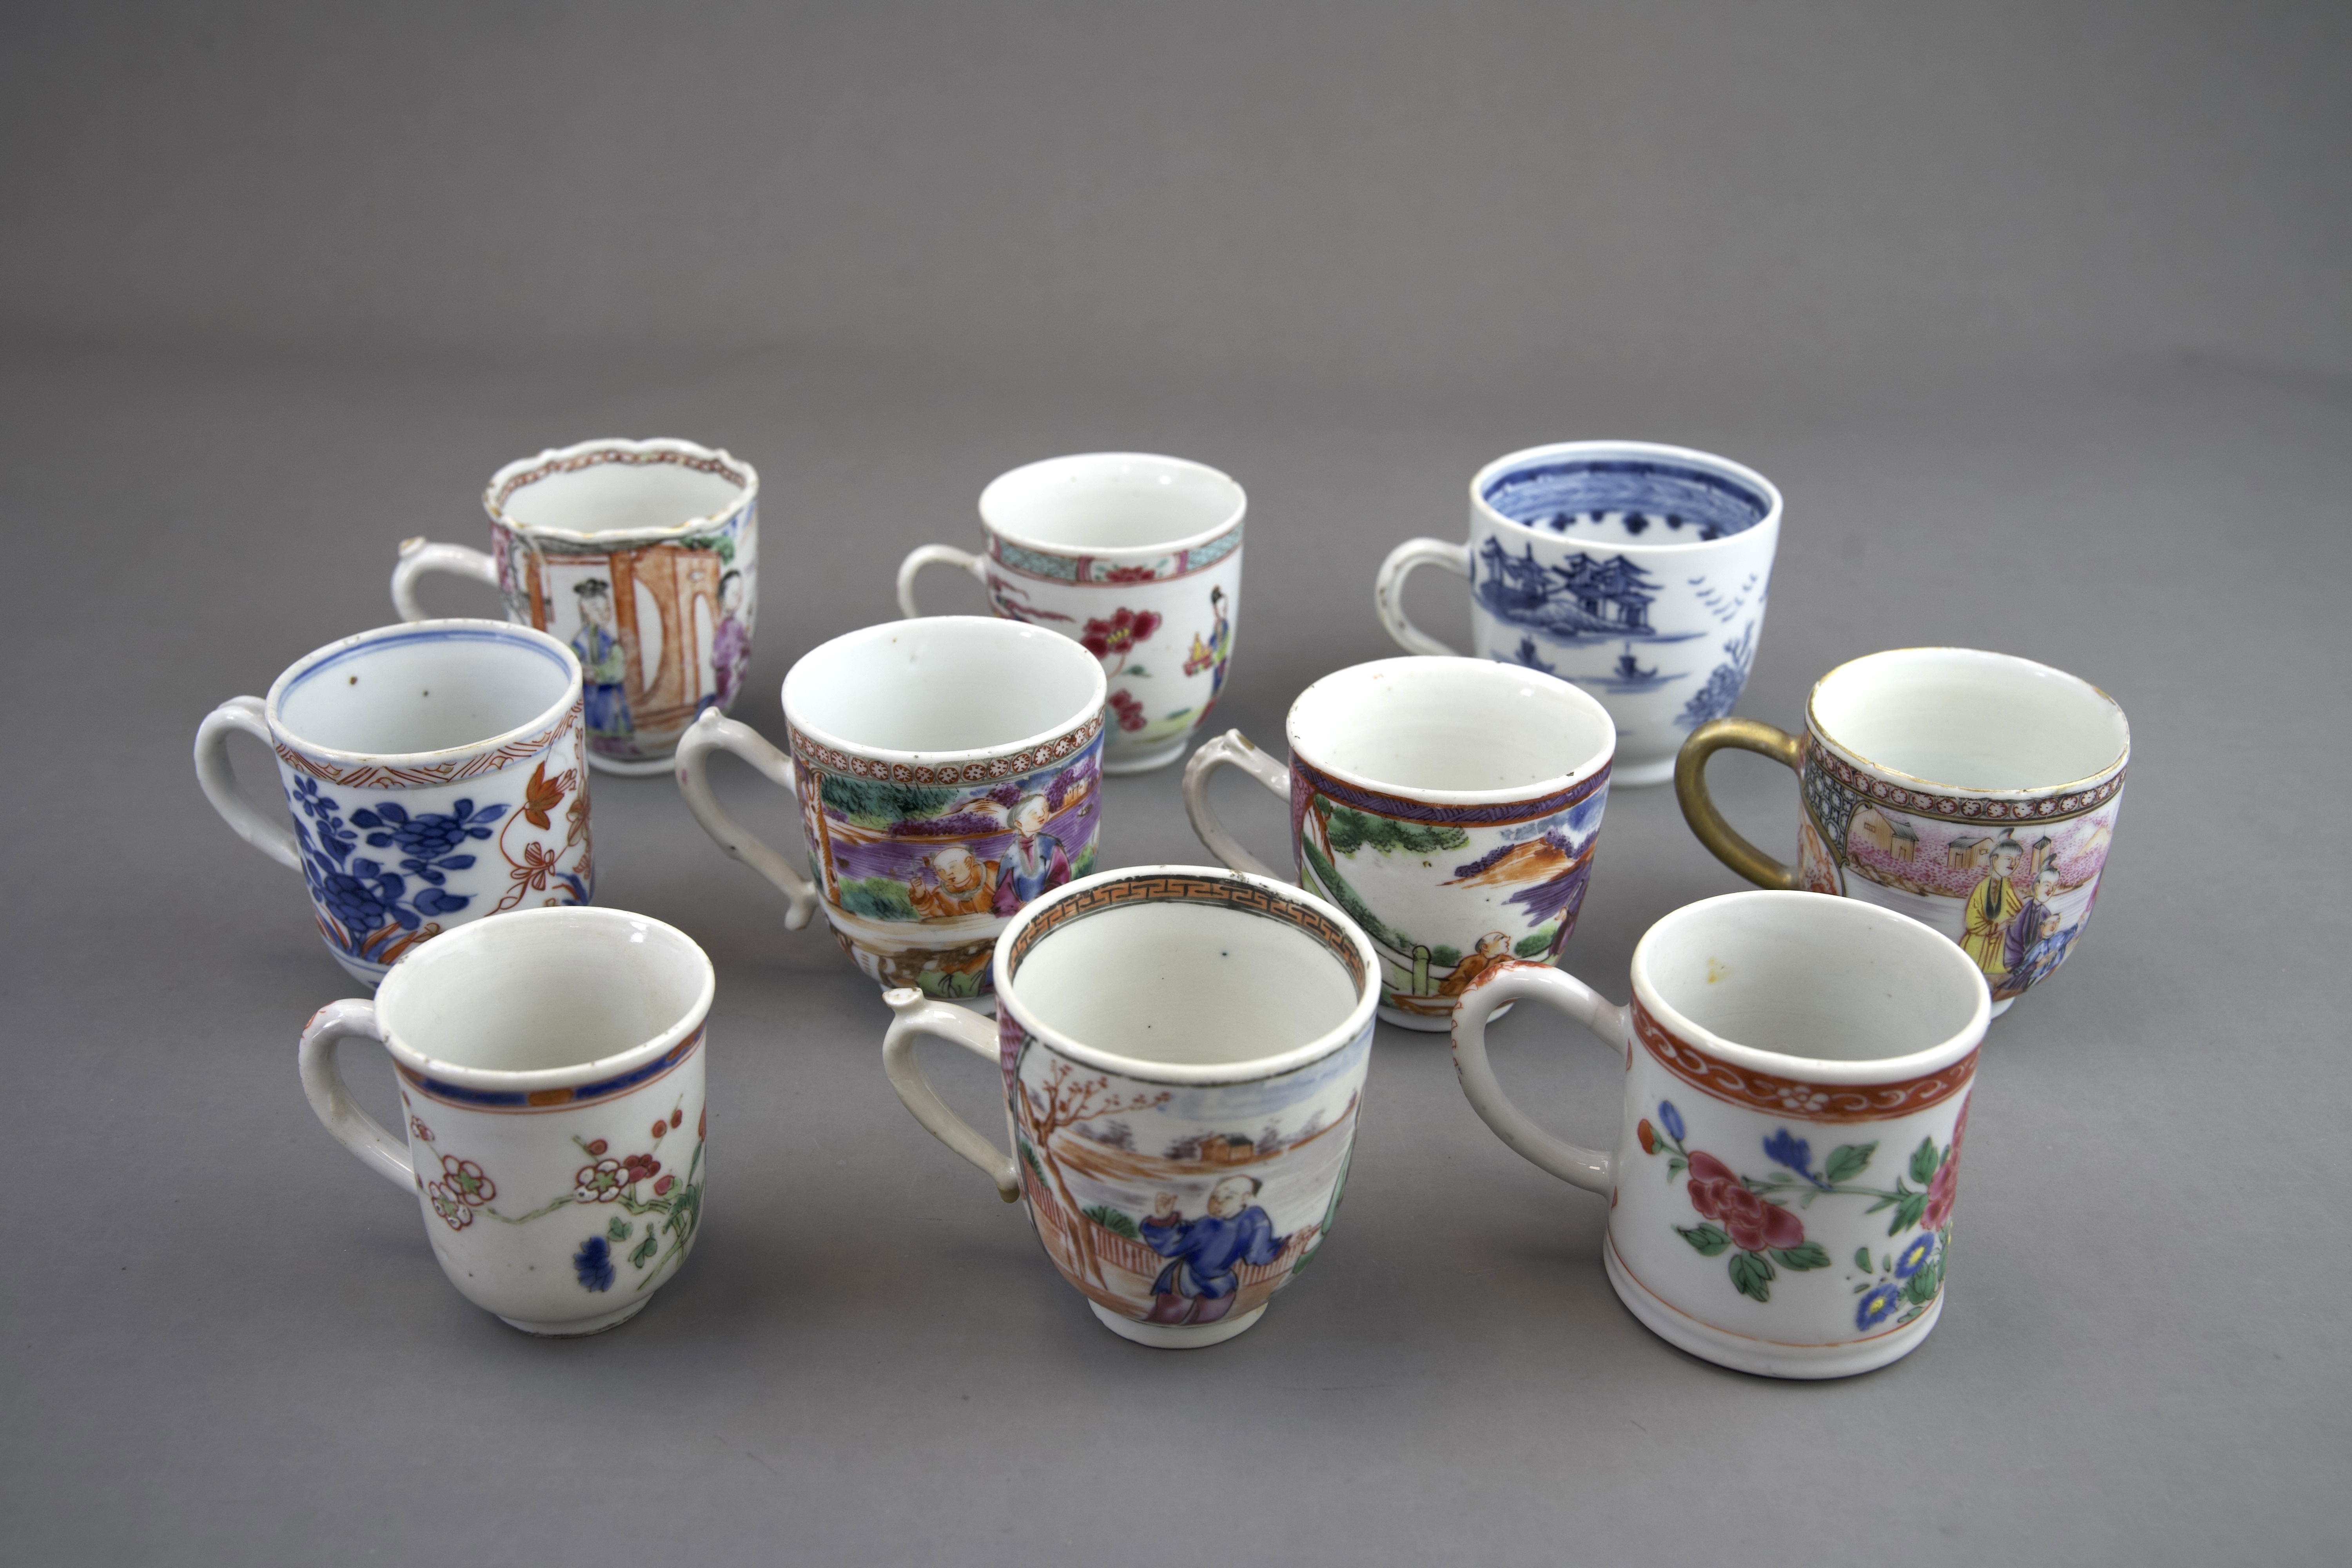 A Set of 10 Blue and White and 'famille rose' Coffee Cups, 18th century - Image 2 of 6